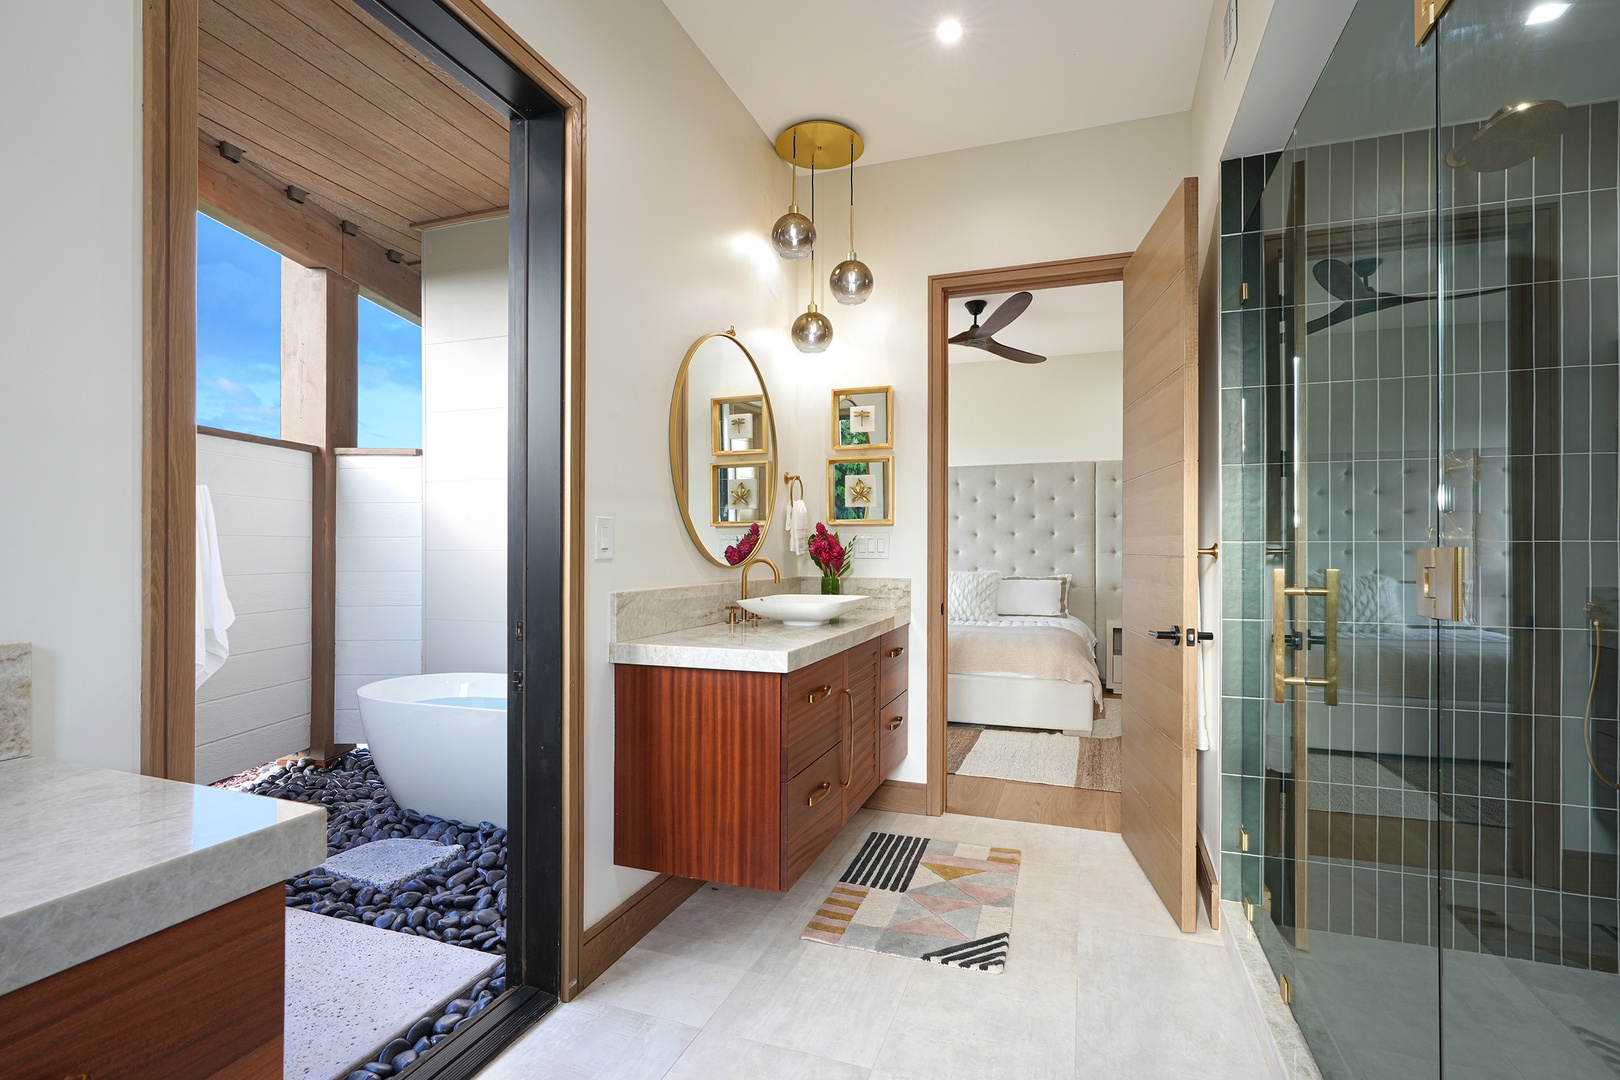 Koloa Vacation Rentals, Hale Keaka at Kukui'ula - Step into this chic ensuite, where modern fixtures and warm wood tones are complemented by playful geometric mirrors, creating a space that's both inviting and stylish.